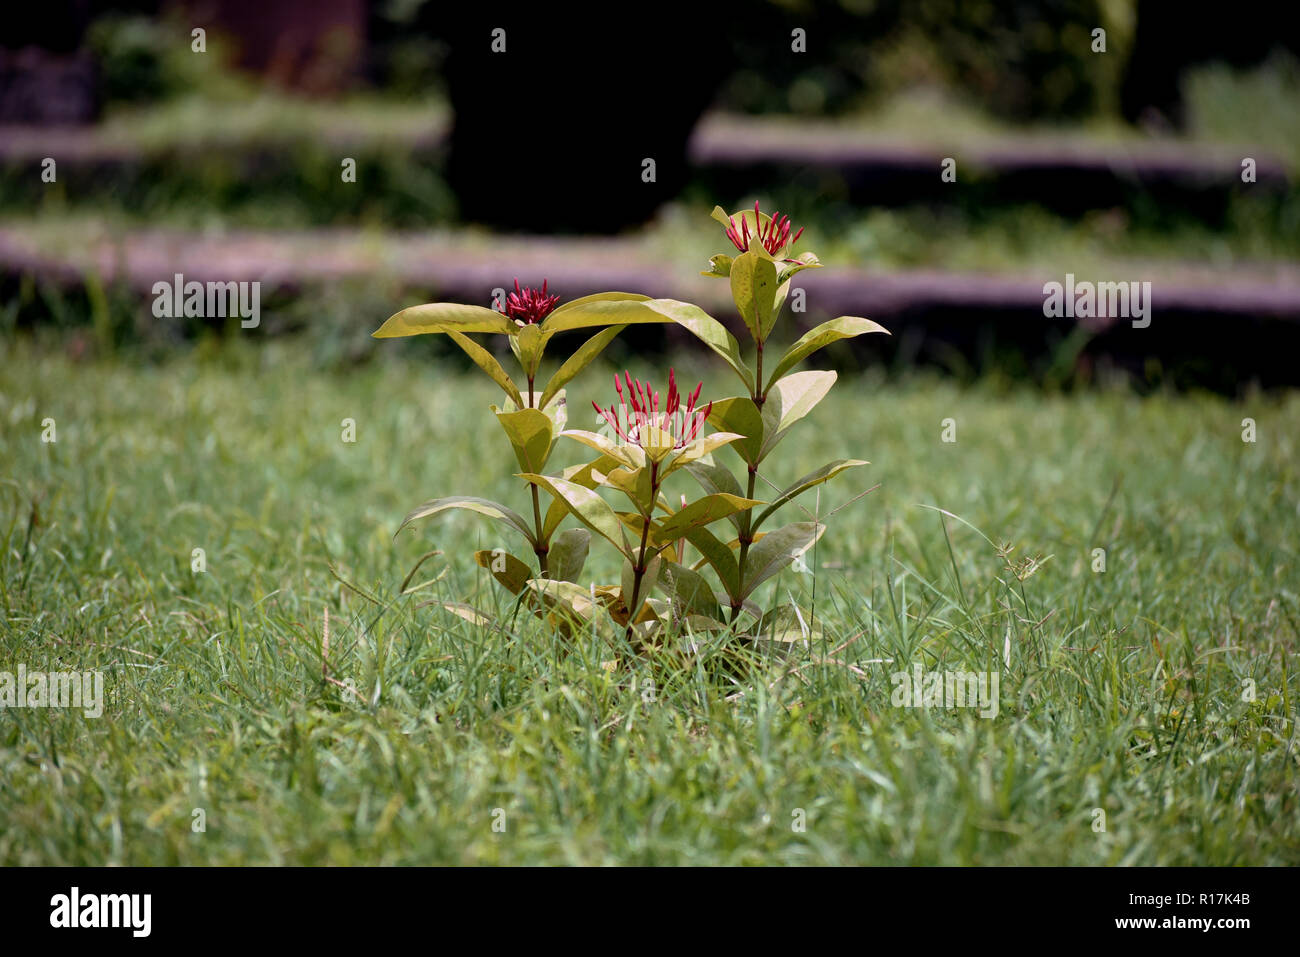 When a seed falls, there rises a tree. A scenic nature of a plant among the grass Stock Photo